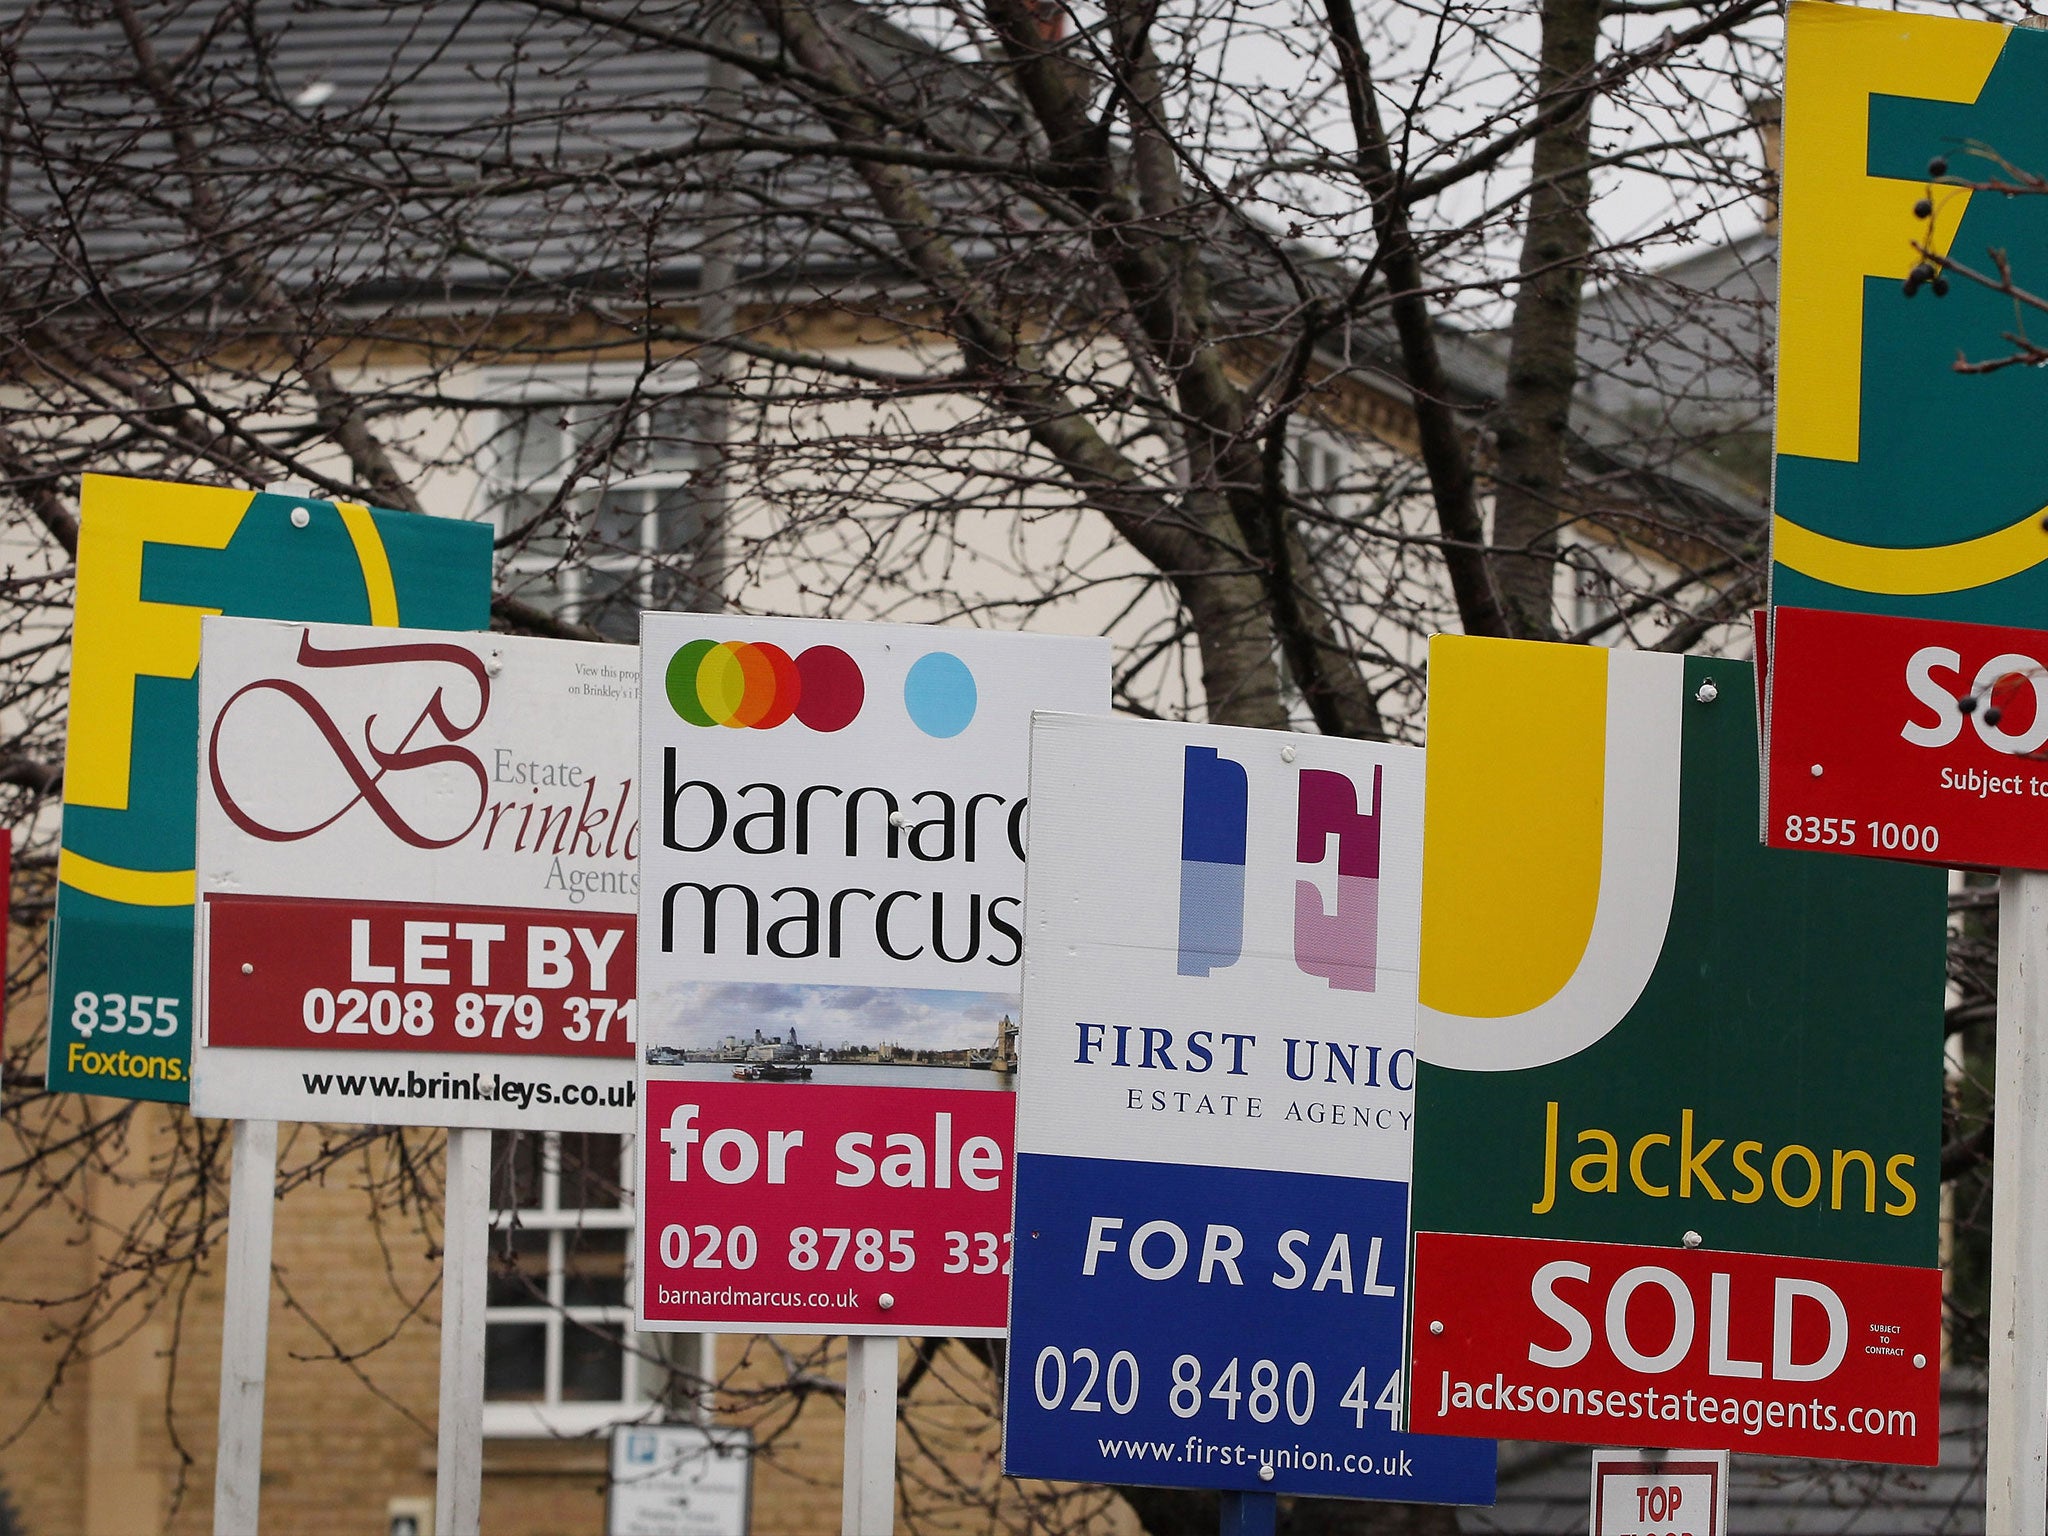 House prices are on the rise despite the virus upheaval